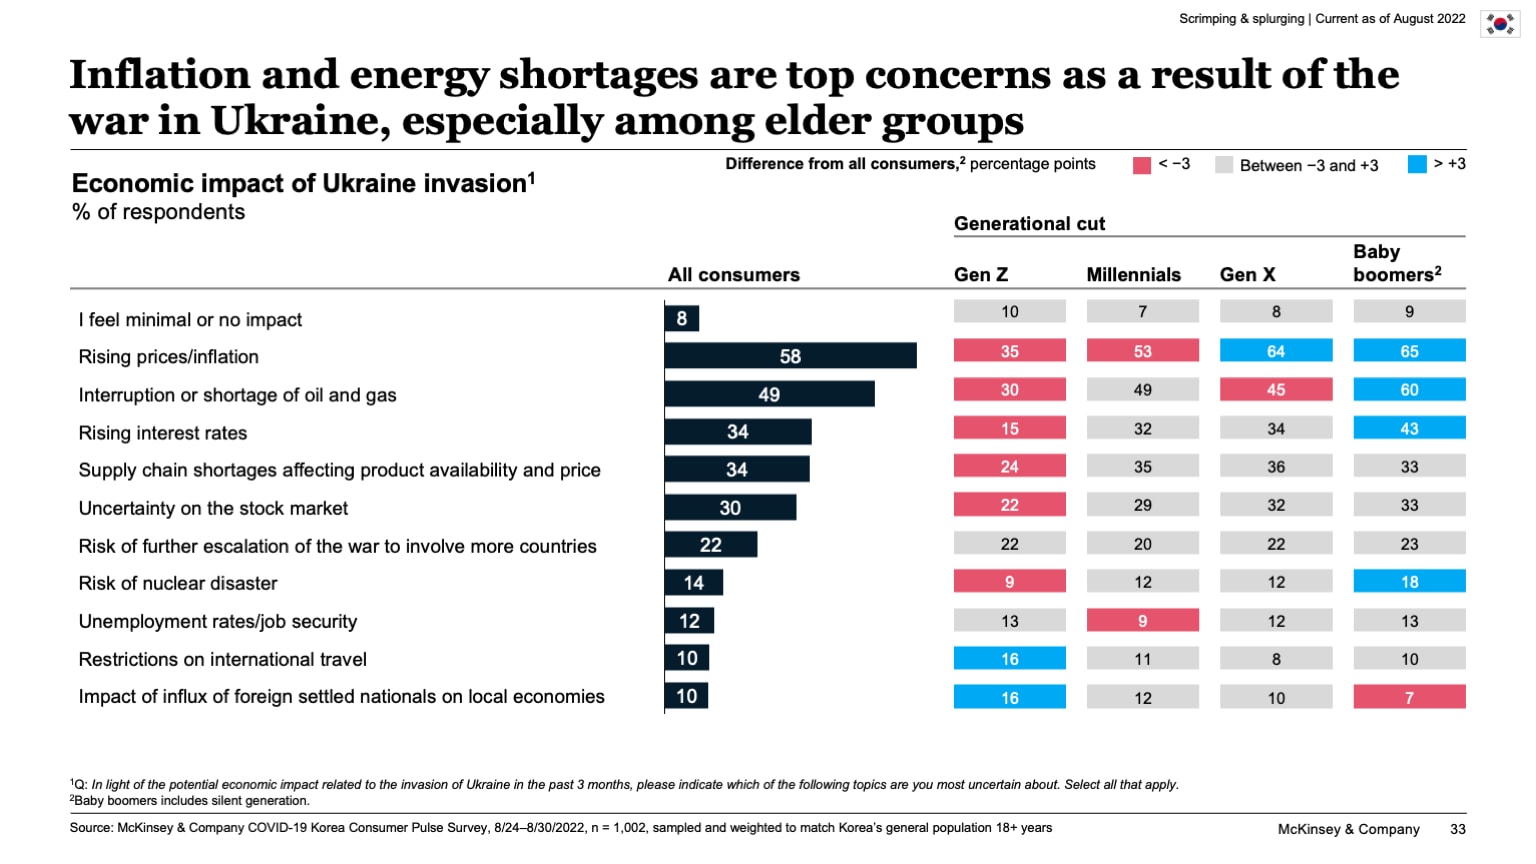 Inflation and energy shortages are top concerns as a result of the war in Ukraine, especially among elder groups